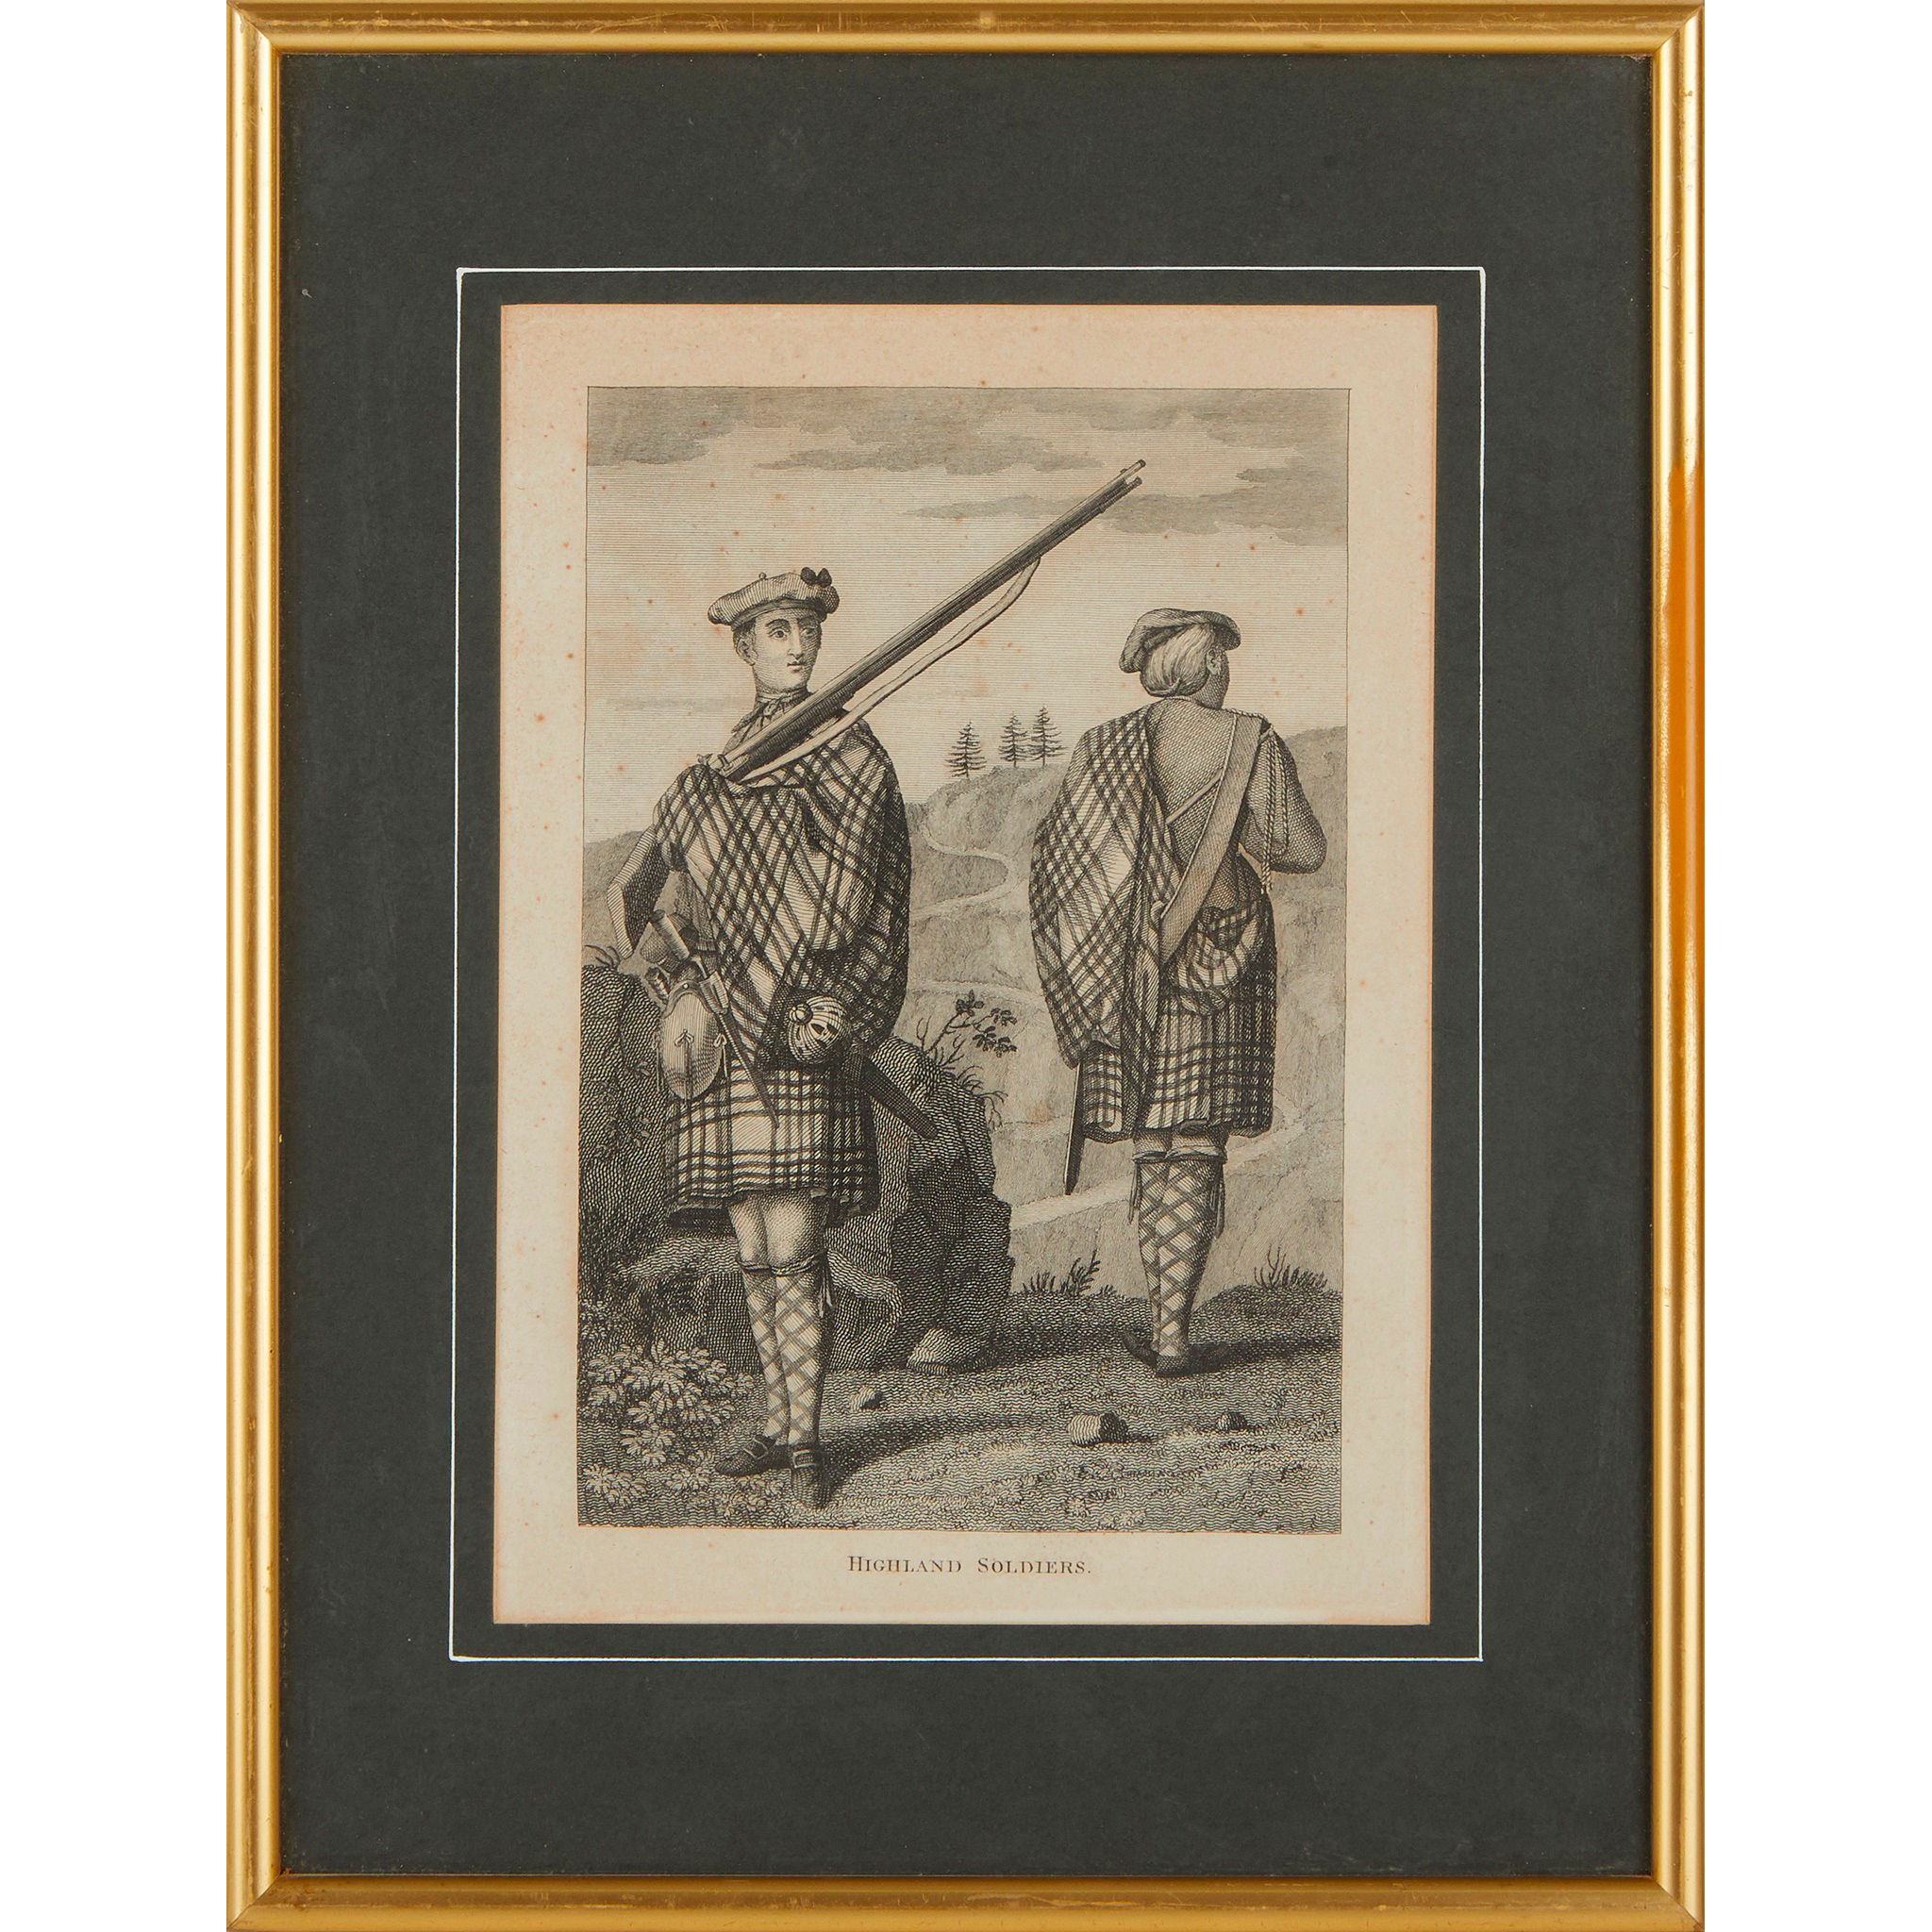 Two framed 18th century engravings of Highland soldier - Image 2 of 2